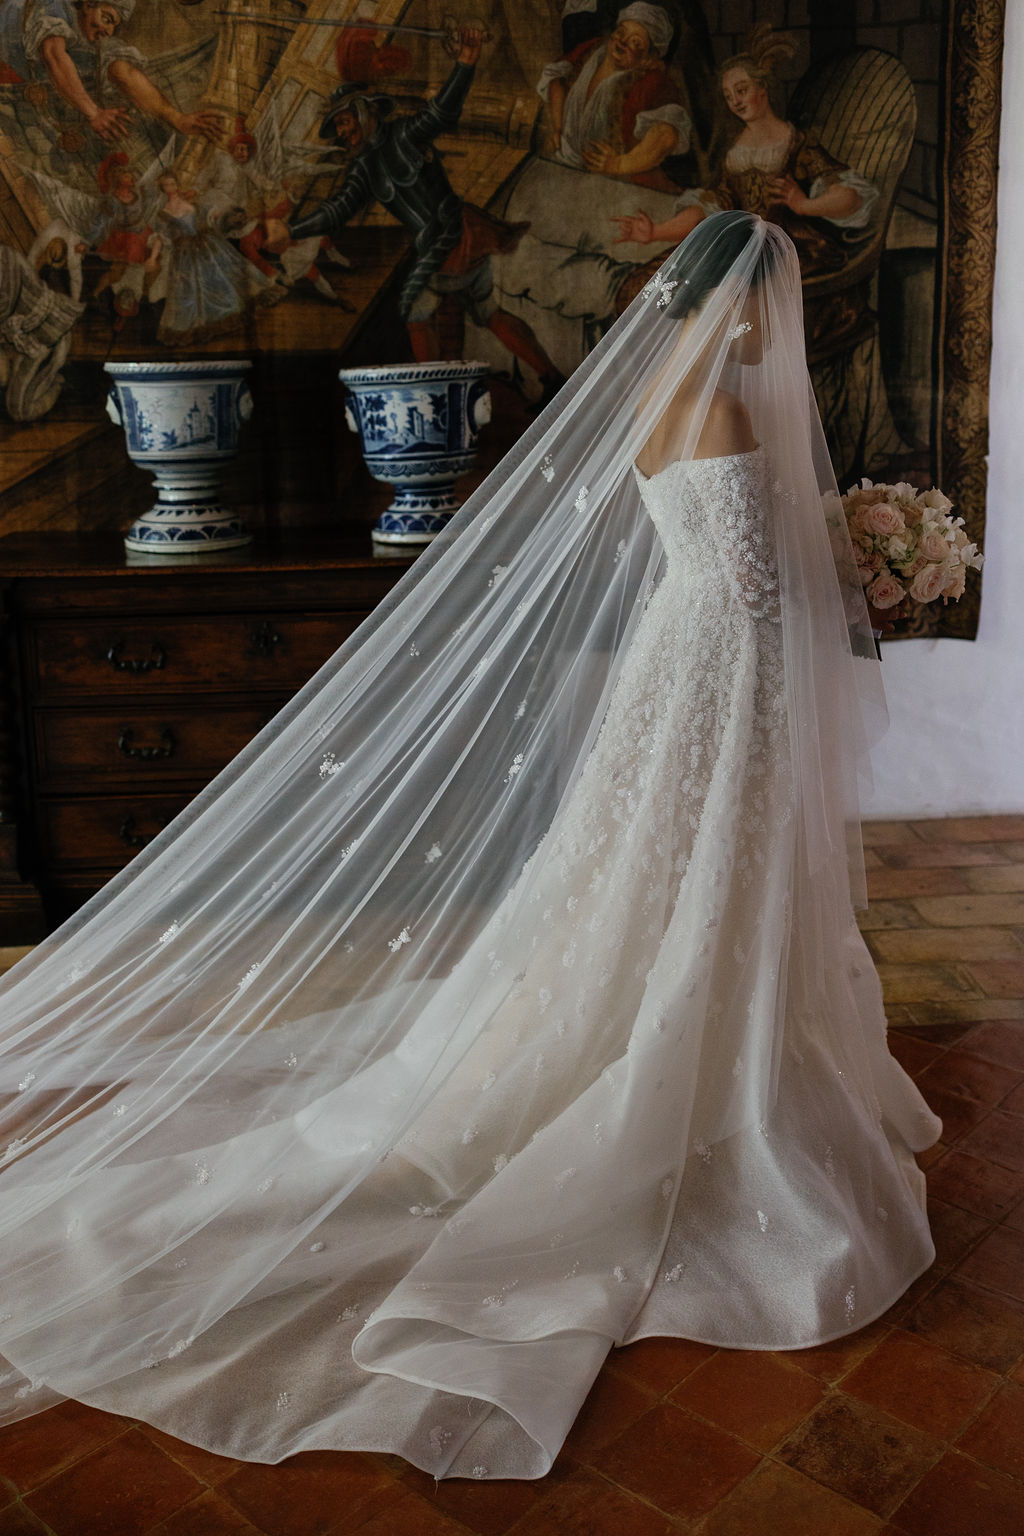 Bride in floral designer wedding gown and veil that match flowers